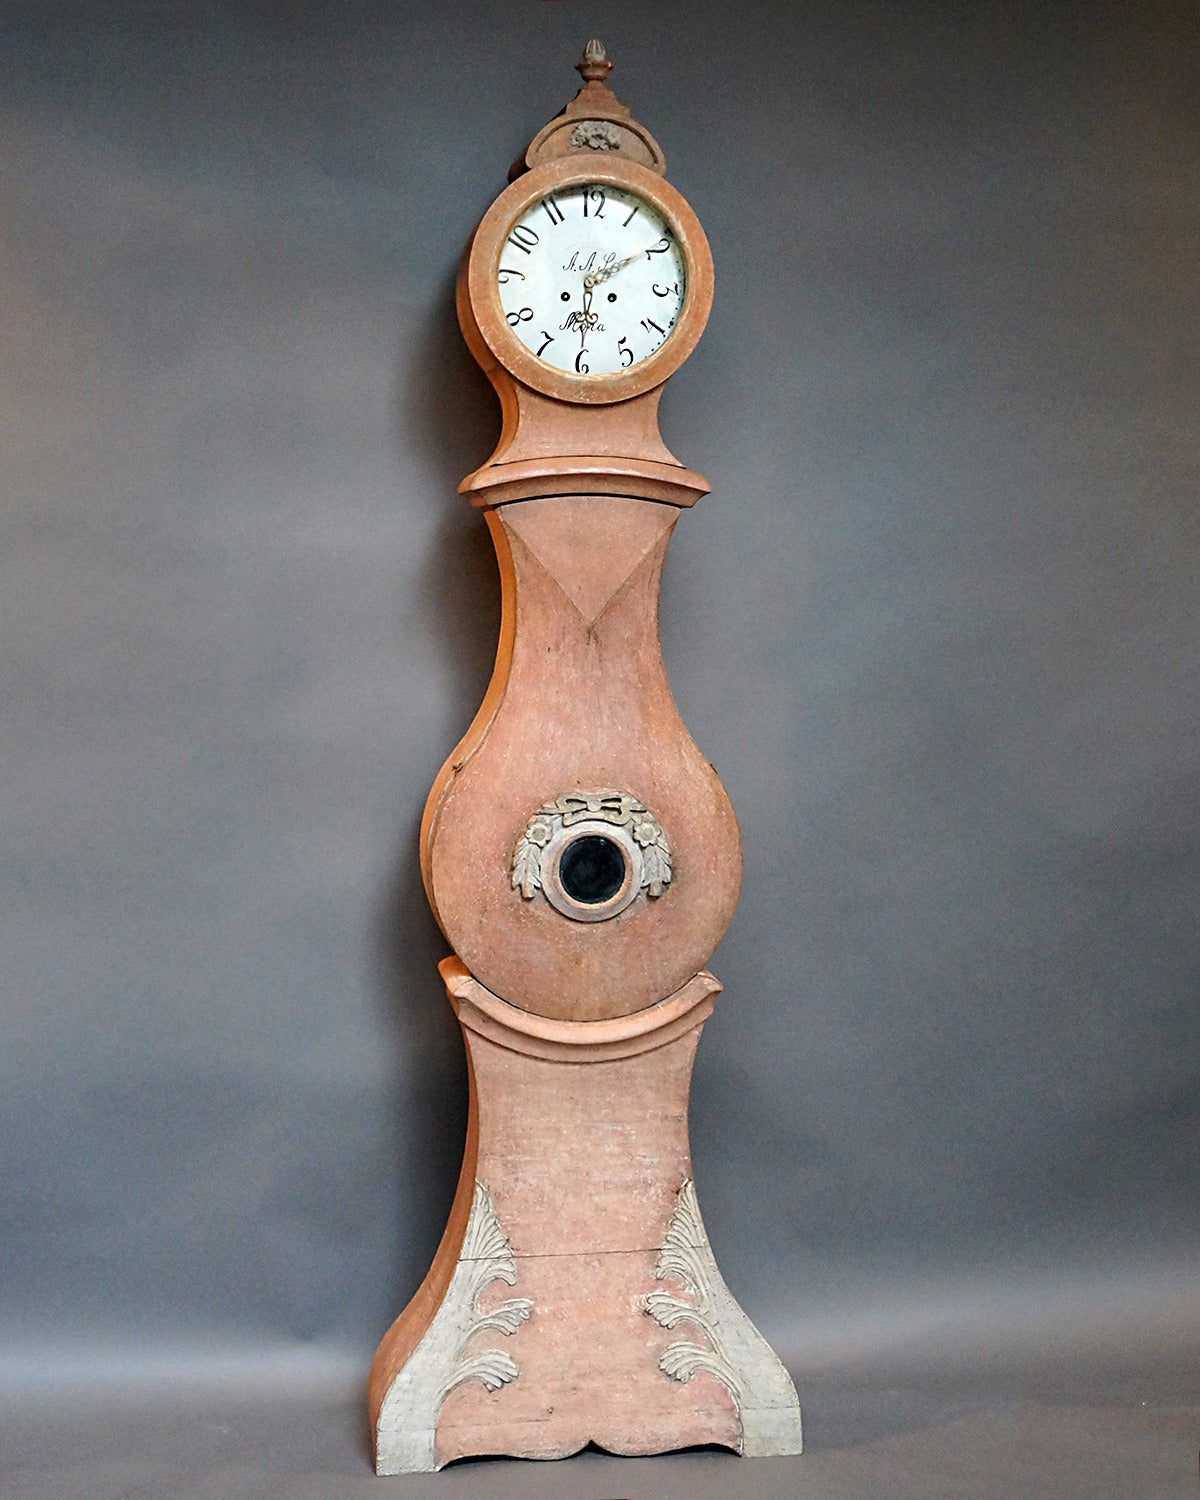 Signed Mora clock, Sweden, circa 1820, in original salmon paint and with its original clock works. The case features an interesting shaped front with applied floral and foliate carving, while the bonnet has a nosegay of flowers and a carved urn with